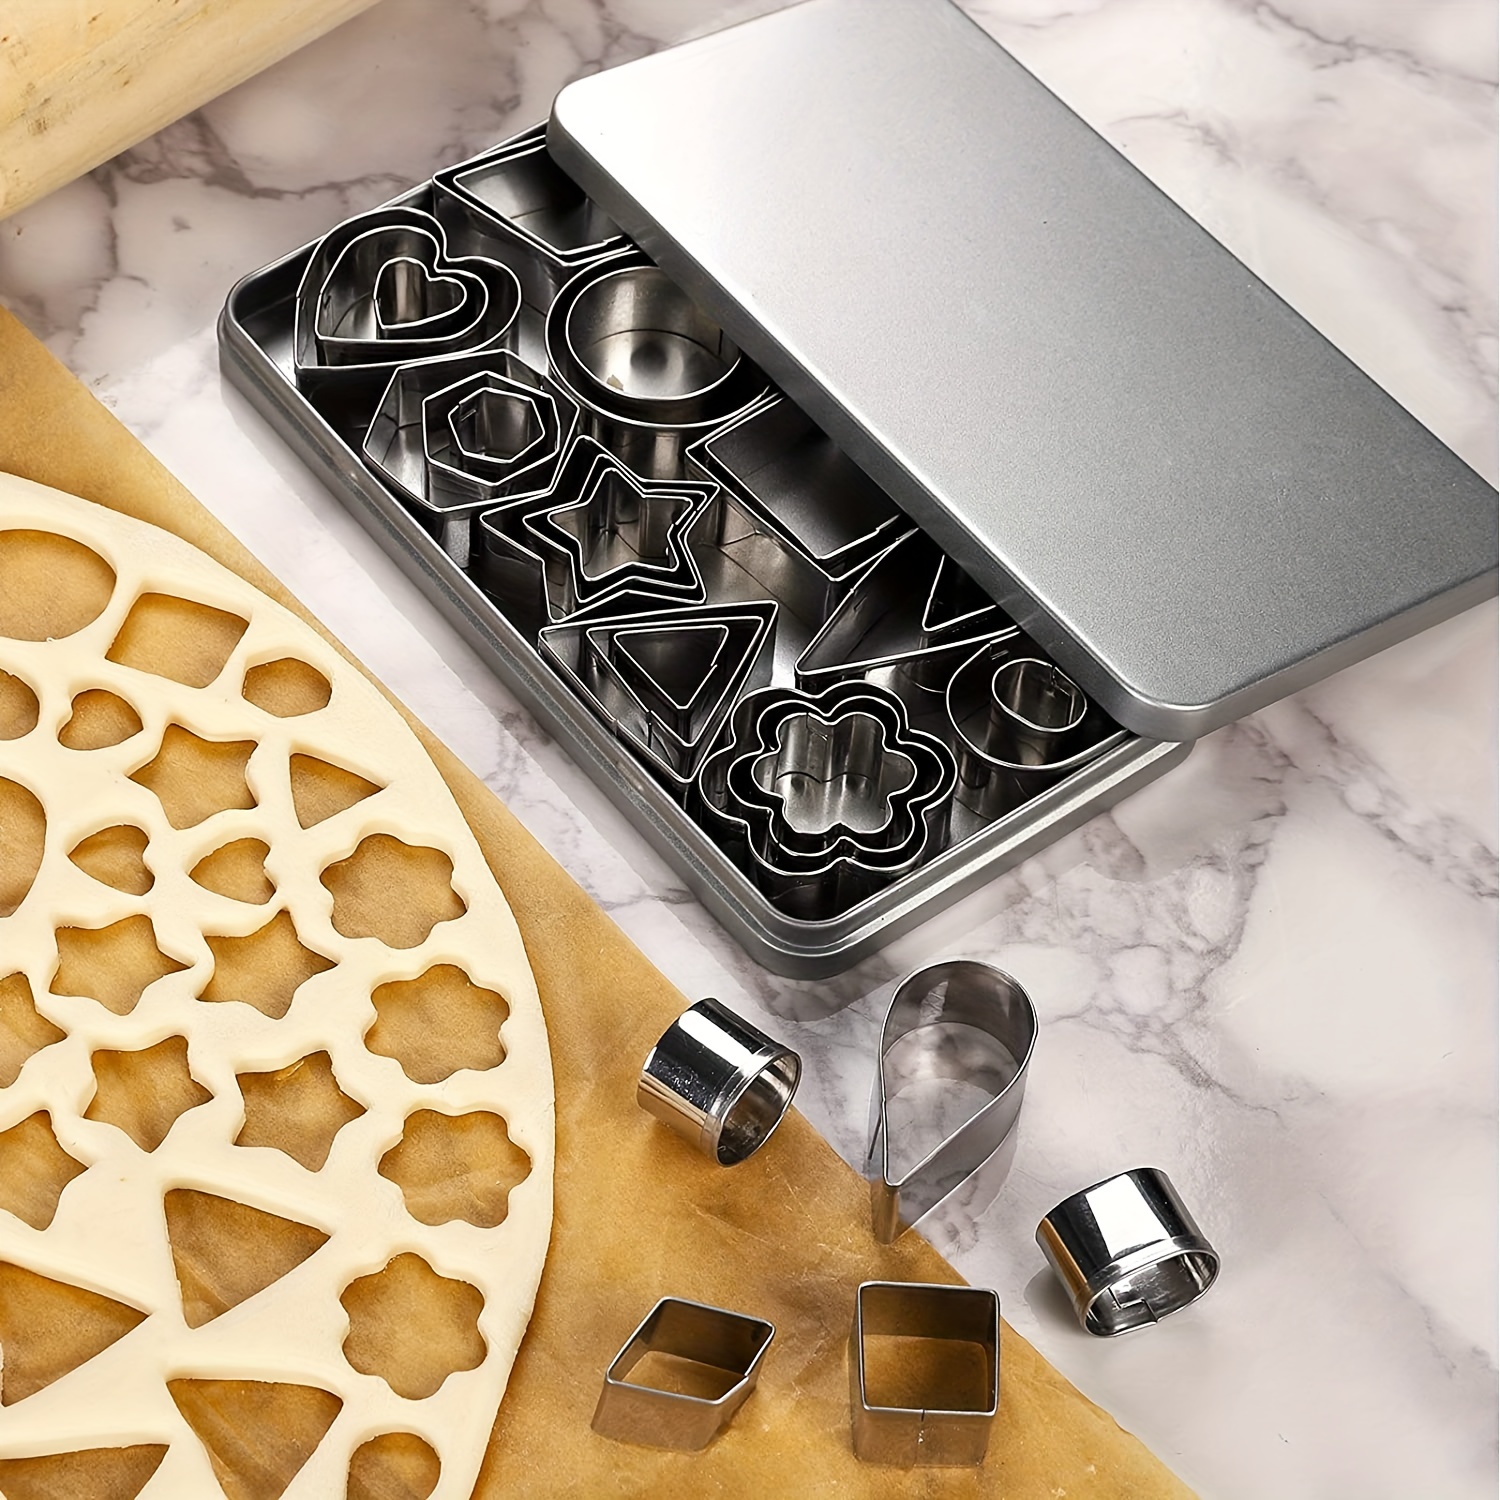 

30pcs, Geometric Cookie Cutters, Stainless Steel Pastry Cutters, Biscuit Molds, Baking Tools, Kitchen Accessories